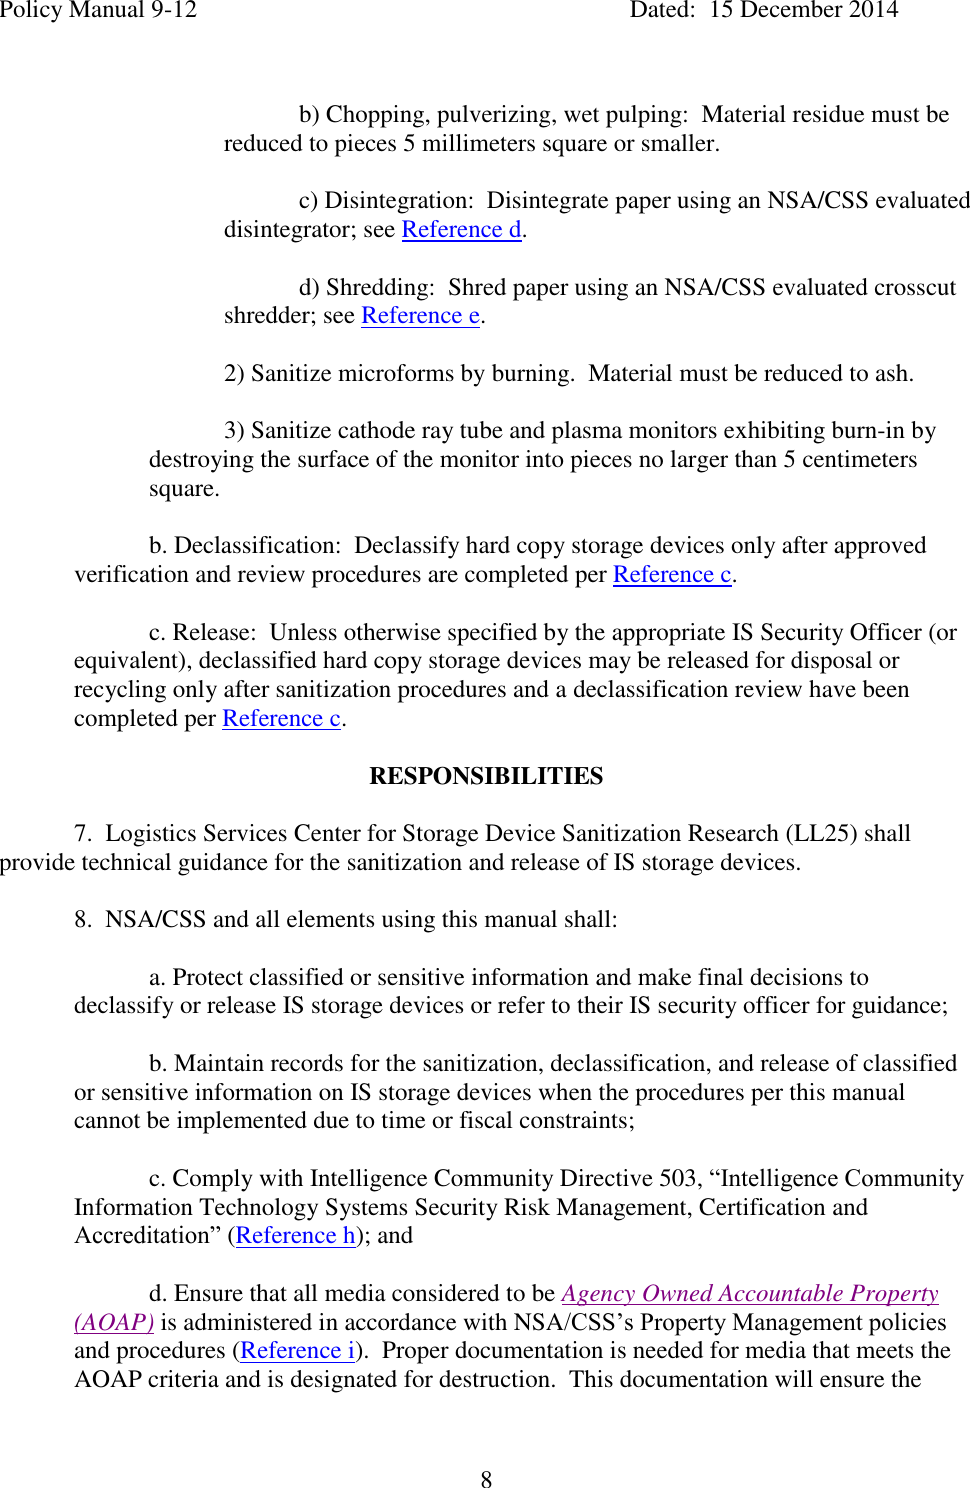 Page 8 of 10 - Storage-device-declassification-manual